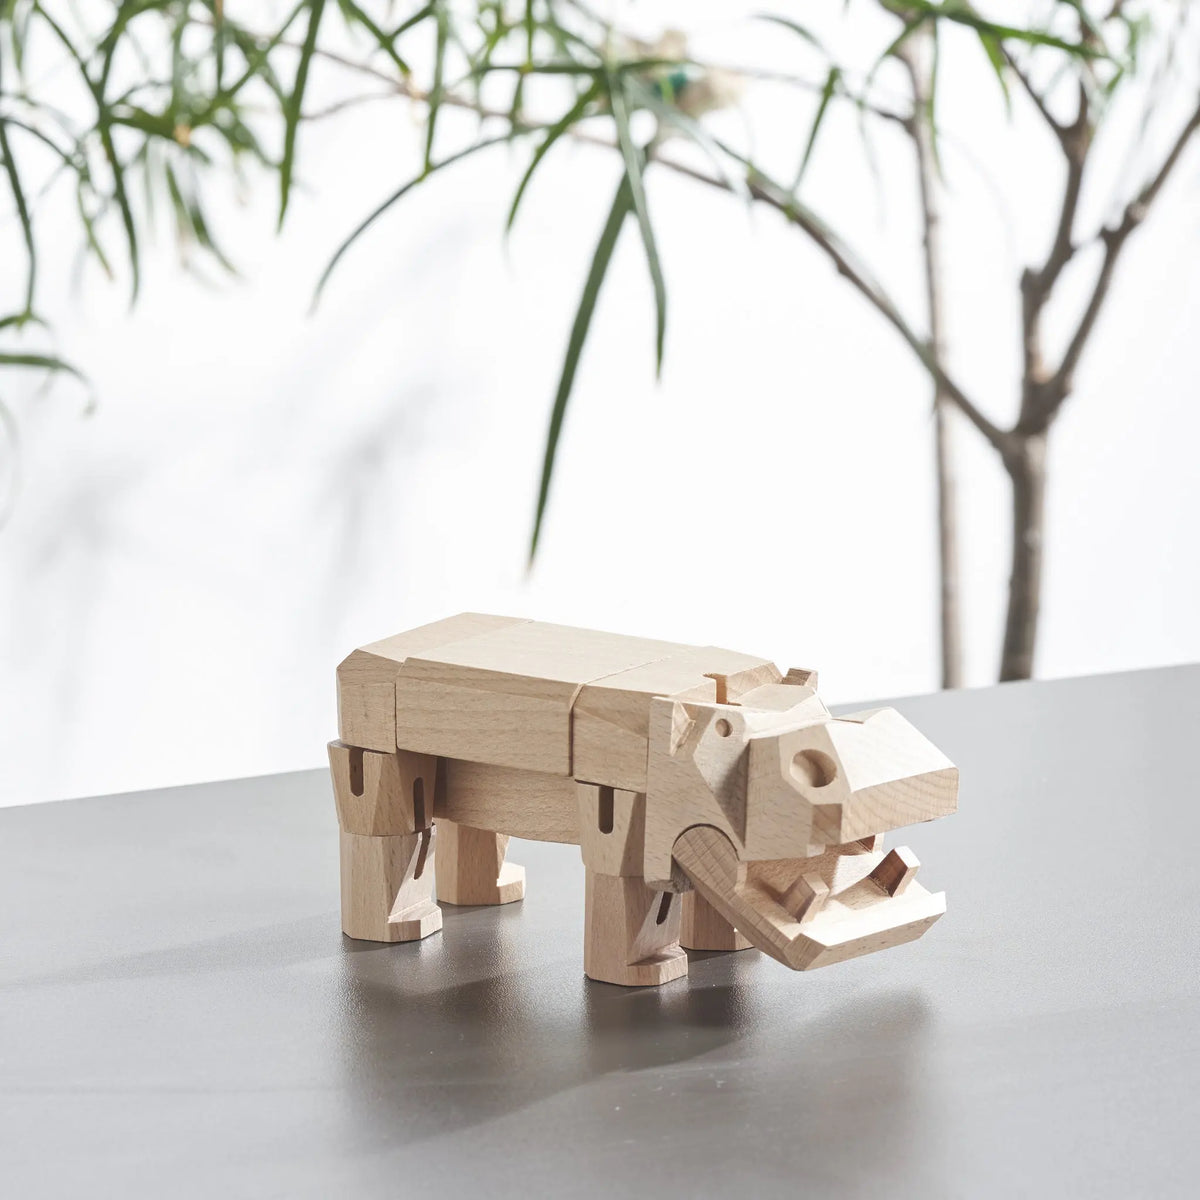 Morphits ® Hippo Wooden Toy: Explore the Wild with Poseable Wooden Playset Friends - Yoshiaki Ito Design Stand N3